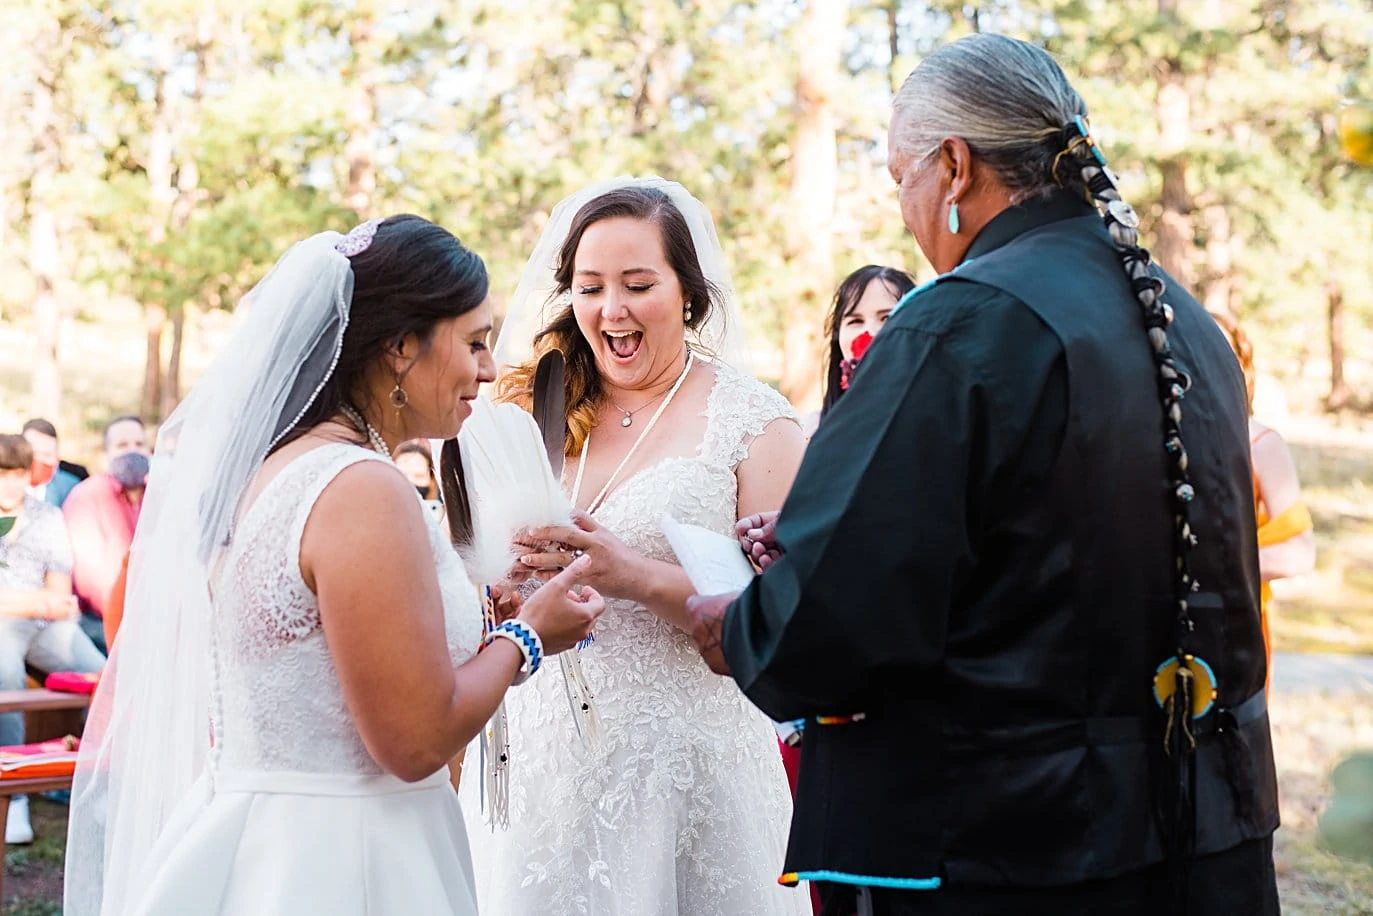 brides exchange rings excitedly at fall Deer Creek Valley Ranch wedding by Boulder wedding photographer Jennie Crate